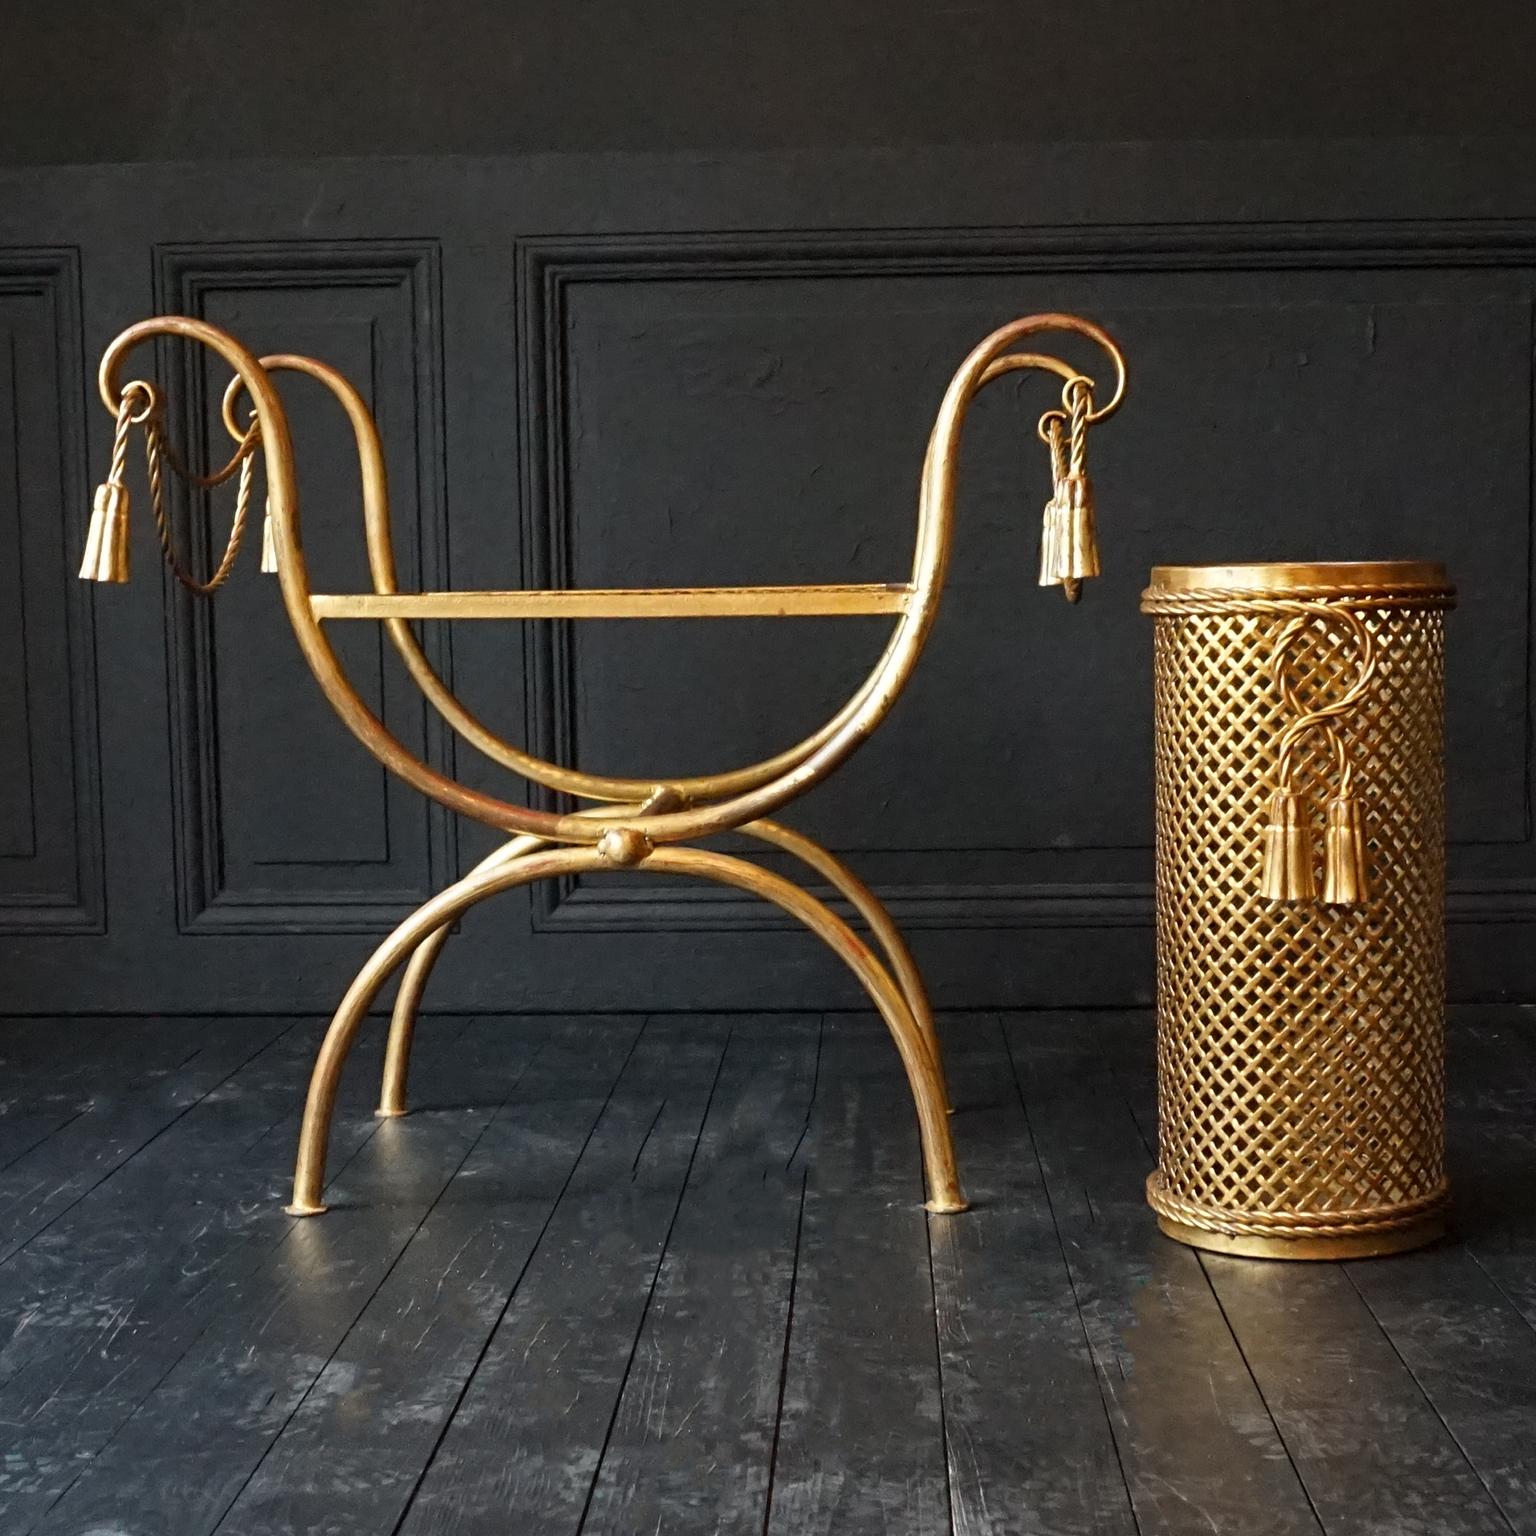 Vintage MCM Hollywood Regency gilt metal or tole rope and tassel stool or bench and umbrella stand.
This fantastic set would look great in any hallway. 
I just love the turned lifelike rope and tassel design. 
The condition of both is very good and